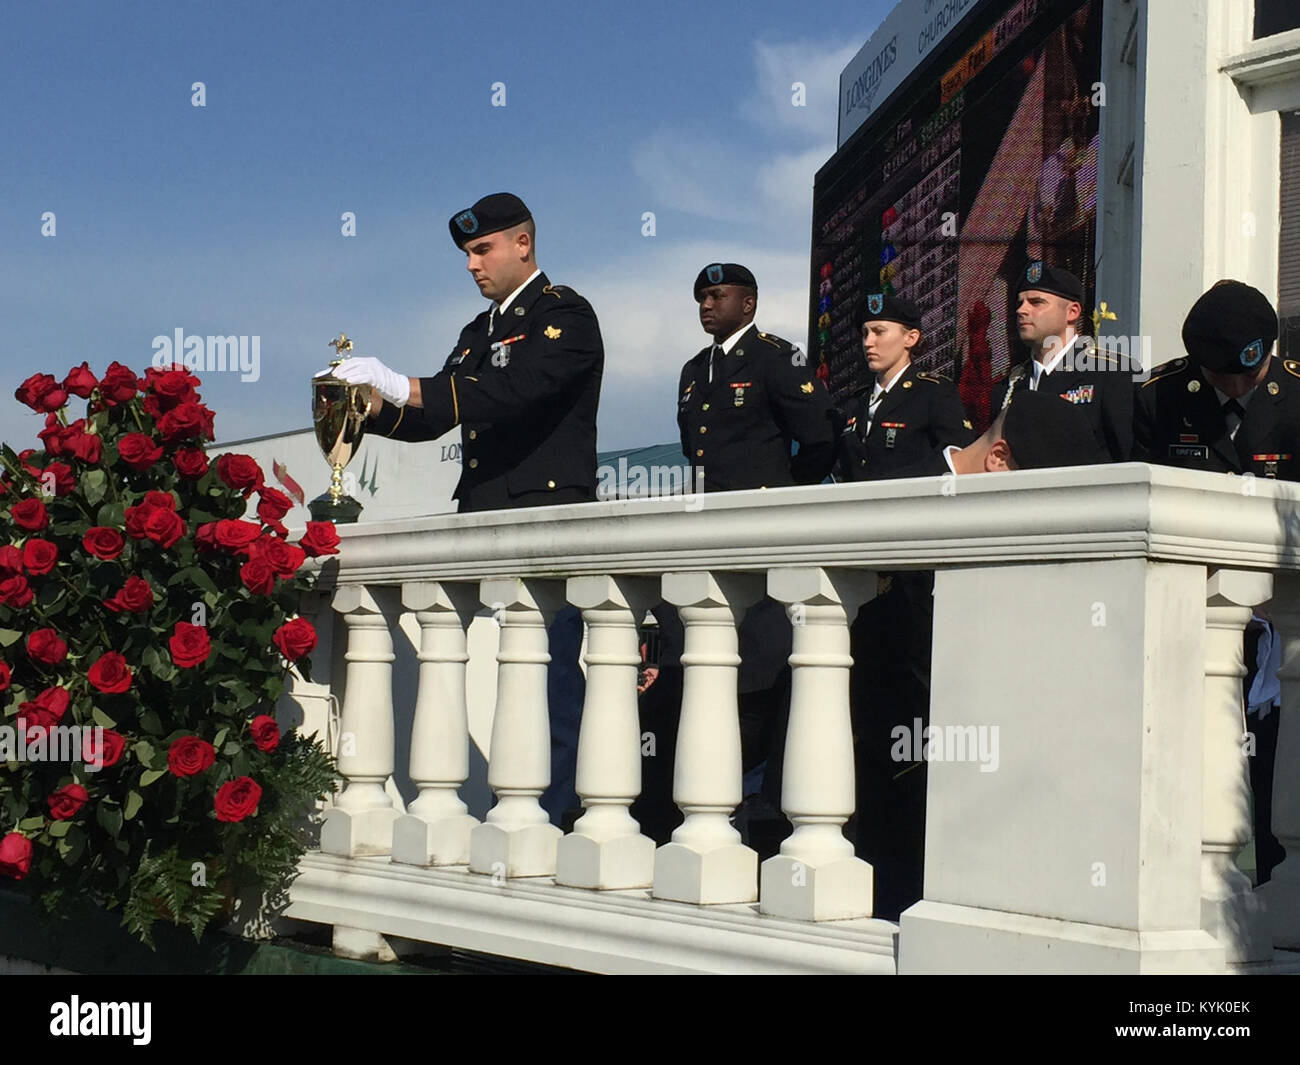 Members of the Trophy Detail place the Kentucky Derby Trophy in the